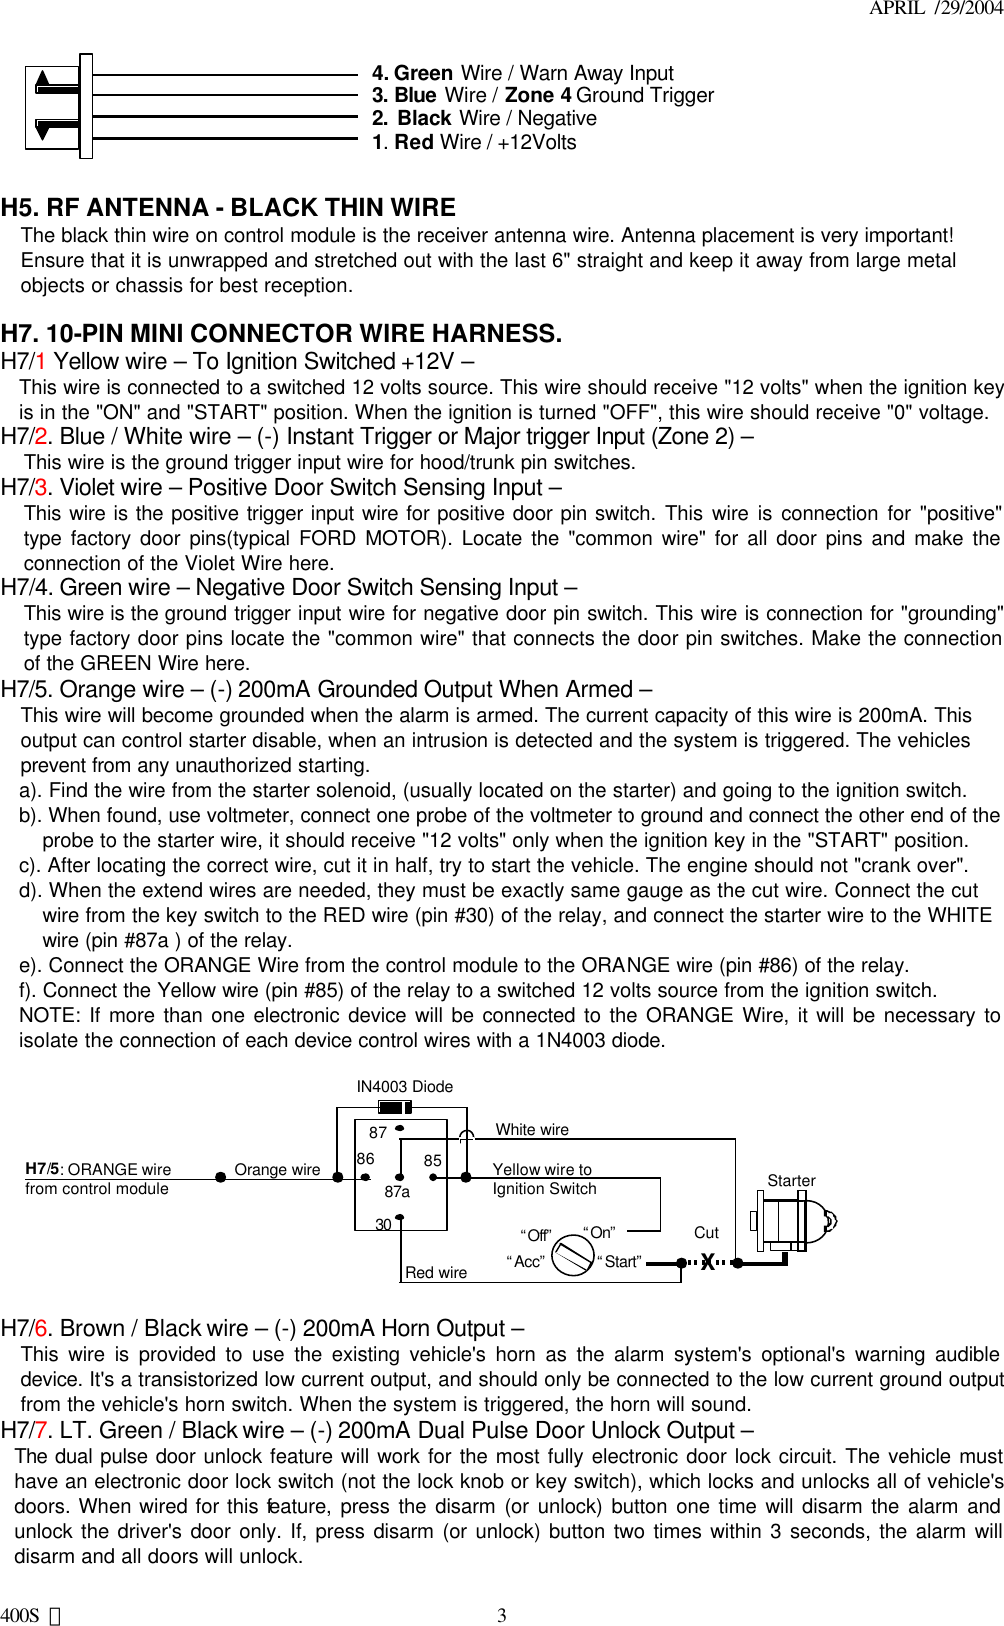 APRIL  /29/2004 400S 美 34. Green Wire / Warn Away Input3. Blue Wire / Zone 4 Ground Trigger2. Black Wire / Negative1. Red Wire / +12Volts  H5. RF ANTENNA - BLACK THIN WIRE The black thin wire on control module is the receiver antenna wire. Antenna placement is very important! Ensure that it is unwrapped and stretched out with the last 6&quot; straight and keep it away from large metal objects or chassis for best reception.  H7. 10-PIN MINI CONNECTOR WIRE HARNESS. H7/1 Yellow wire – To Ignition Switched +12V – This wire is connected to a switched 12 volts source. This wire should receive &quot;12 volts&quot; when the ignition key is in the &quot;ON&quot; and &quot;START&quot; position. When the ignition is turned &quot;OFF&quot;, this wire should receive &quot;0&quot; voltage. H7/2. Blue / White wire – (-) Instant Trigger or Major trigger Input (Zone 2) – This wire is the ground trigger input wire for hood/trunk pin switches. H7/3. Violet wire – Positive Door Switch Sensing Input –   This wire is the positive trigger input wire for positive door pin switch. This wire is connection for &quot;positive&quot; type factory door pins(typical FORD MOTOR). Locate the &quot;common wire&quot; for all door pins and make the connection of the Violet Wire here. H7/4. Green wire – Negative Door Switch Sensing Input – This wire is the ground trigger input wire for negative door pin switch. This wire is connection for &quot;grounding&quot; type factory door pins locate the &quot;common wire&quot; that connects the door pin switches. Make the connection of the GREEN Wire here. H7/5. Orange wire – (-) 200mA Grounded Output When Armed – This wire will become grounded when the alarm is armed. The current capacity of this wire is 200mA. This output can control starter disable, when an intrusion is detected and the system is triggered. The vehicles prevent from any unauthorized starting.  a). Find the wire from the starter solenoid, (usually located on the starter) and going to the ignition switch. b). When found, use voltmeter, connect one probe of the voltmeter to ground and connect the other end of the probe to the starter wire, it should receive &quot;12 volts&quot; only when the ignition key in the &quot;START&quot; position. c). After locating the correct wire, cut it in half, try to start the vehicle. The engine should not &quot;crank over&quot;. d). When the extend wires are needed, they must be exactly same gauge as the cut wire. Connect the cut wire from the key switch to the RED wire (pin #30) of the relay, and connect the starter wire to the WHITE wire (pin #87a ) of the relay. e). Connect the ORANGE Wire from the control module to the ORANGE wire (pin #86) of the relay. f). Connect the Yellow wire (pin #85) of the relay to a switched 12 volts source from the ignition switch. NOTE: If more than one electronic device will be connected to the ORANGE Wire, it will be necessary to isolate the connection of each device control wires with a 1N4003 diode.   87 87a 85 30 86 IN4003 Diode H7/5: ORANGE wire  from control module “Start” “On” White wire X Cut Red wire Orange wire “Acc” “Off” Starter Yellow wire to Ignition Switch    H7/6. Brown / Black wire – (-) 200mA Horn Output – This wire is provided to use the existing vehicle&apos;s horn as the alarm system&apos;s optional&apos;s warning audible device. It&apos;s a transistorized low current output, and should only be connected to the low current ground output from the vehicle&apos;s horn switch. When the system is triggered, the horn will sound.  H7/7. LT. Green / Black wire – (-) 200mA Dual Pulse Door Unlock Output – The dual pulse door unlock feature will work for the most fully electronic door lock circuit. The vehicle must have an electronic door lock switch (not the lock knob or key switch), which locks and unlocks all of vehicle&apos;s doors. When wired for this feature, press the disarm (or unlock) button one time will disarm the alarm and unlock the driver&apos;s door only. If, press disarm (or unlock) button two times within 3 seconds, the alarm will disarm and all doors will unlock. 